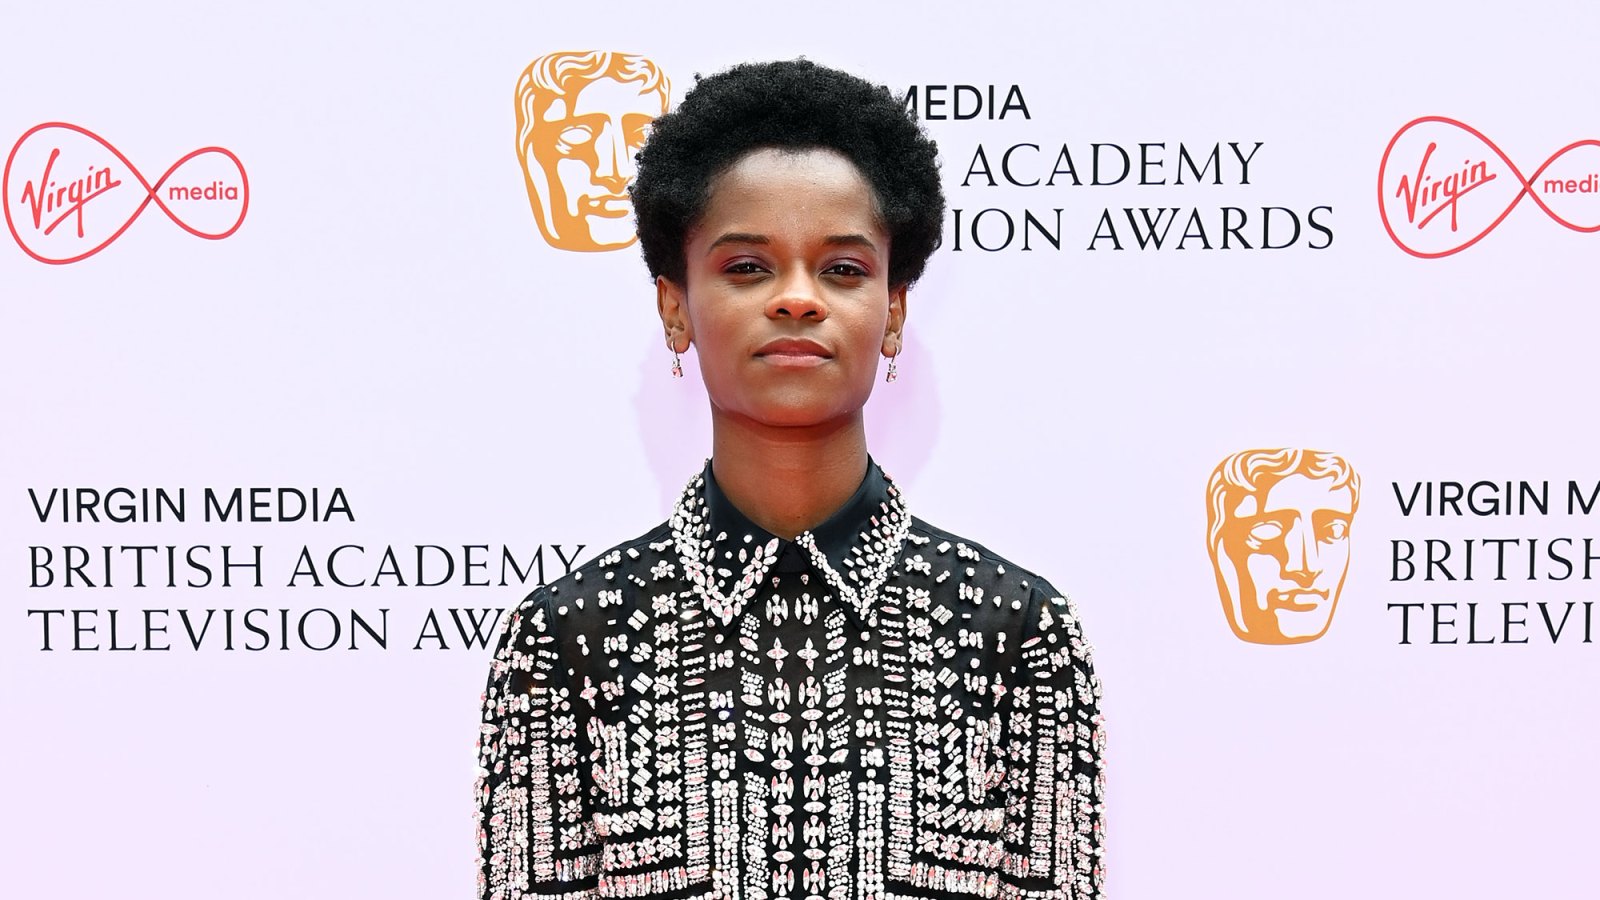 Letitia Wright Responds to Claims That She Shared Anti-Vaccine Views on 'Black Panther 2' Set